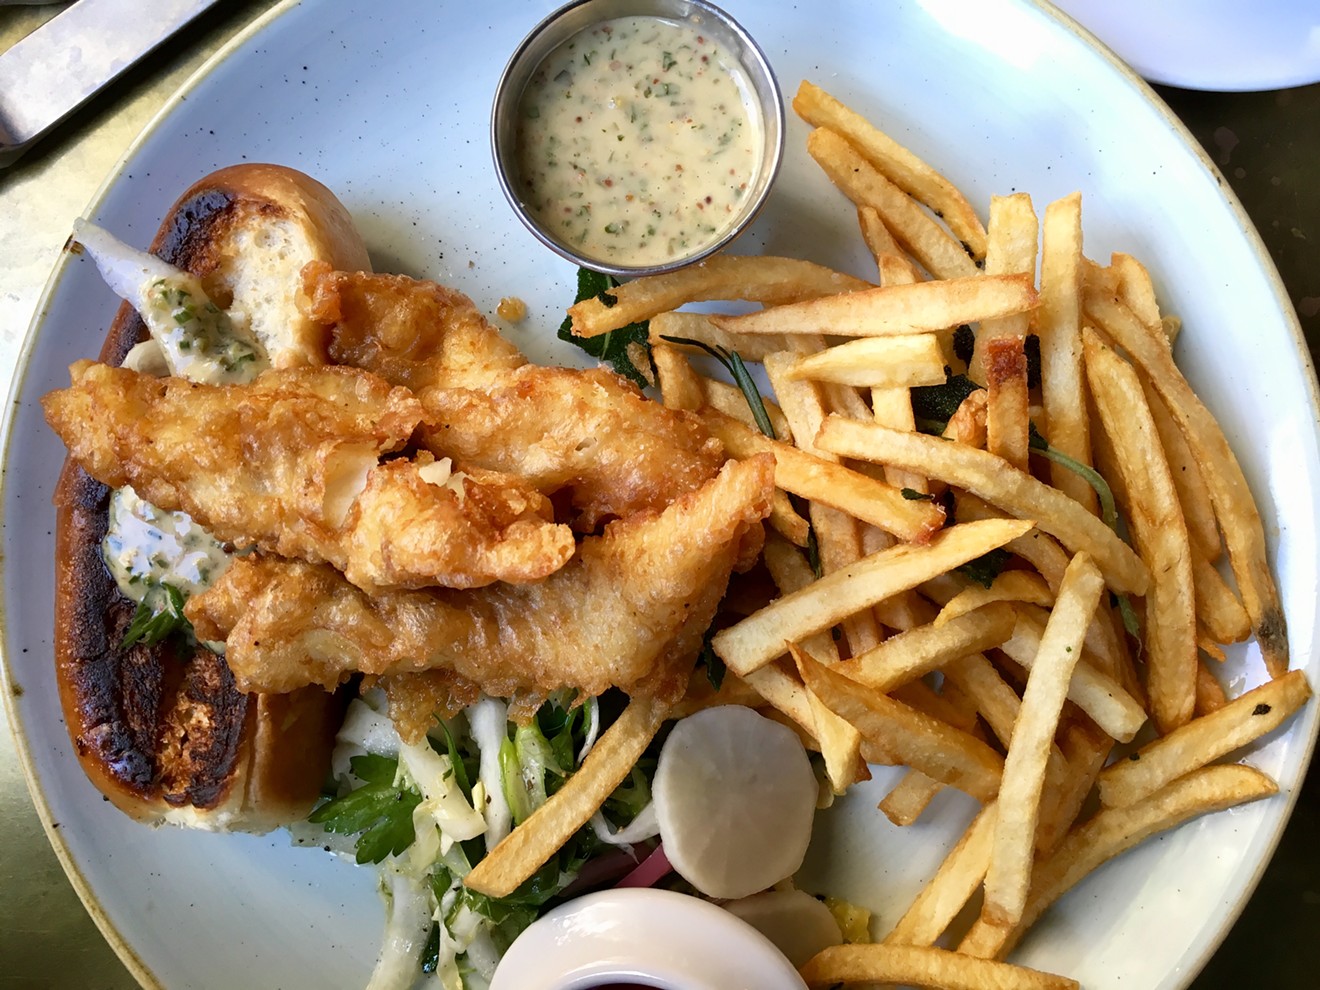 The lunch fried haddock dish is a sort of deconstructed po-boy with remoulade sauce and fries for $15.